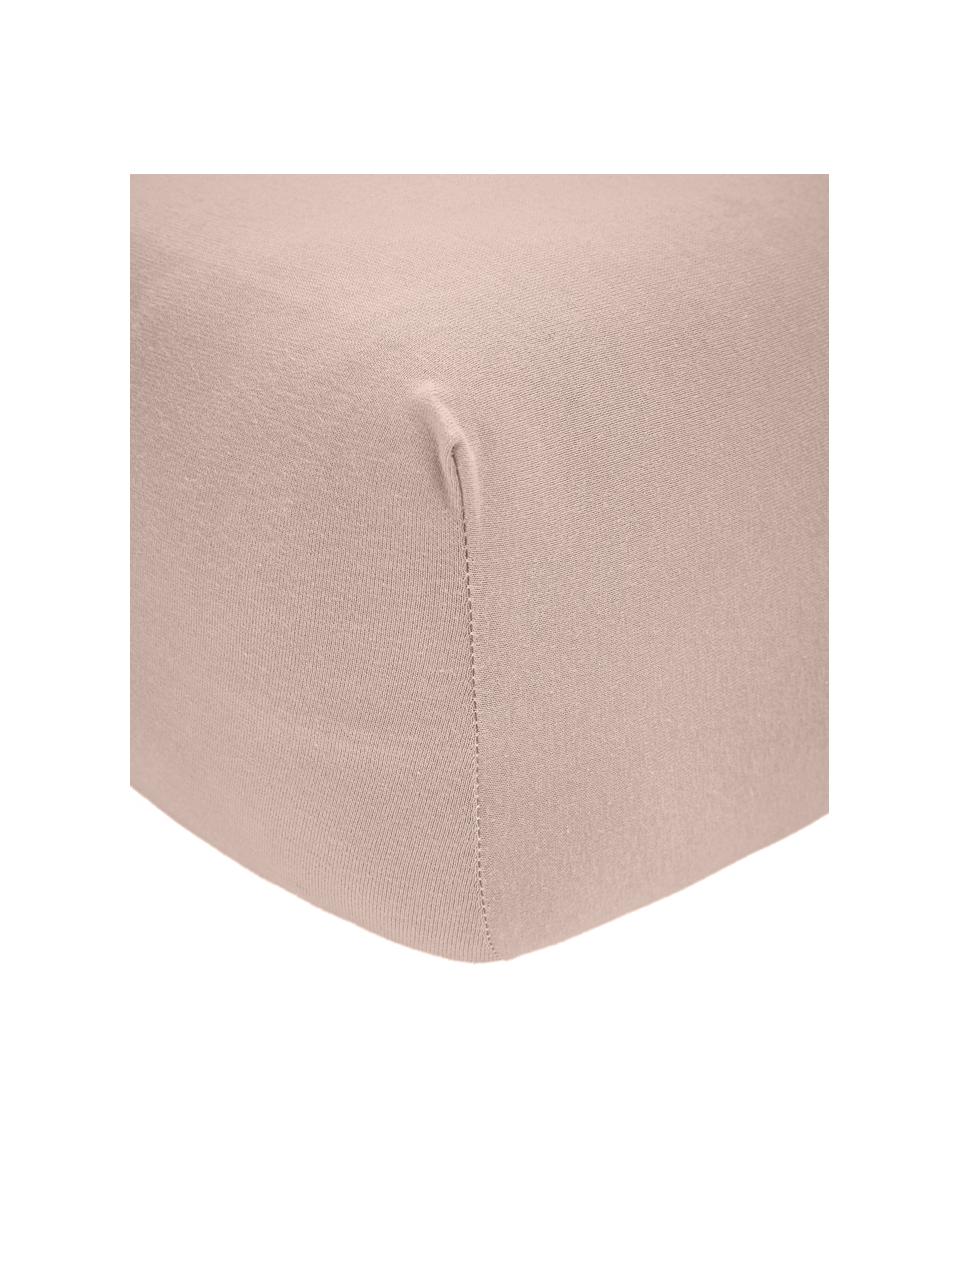 Drap housse jersey-élasthanne taupe pour sommier tapissier Lara, Taupe